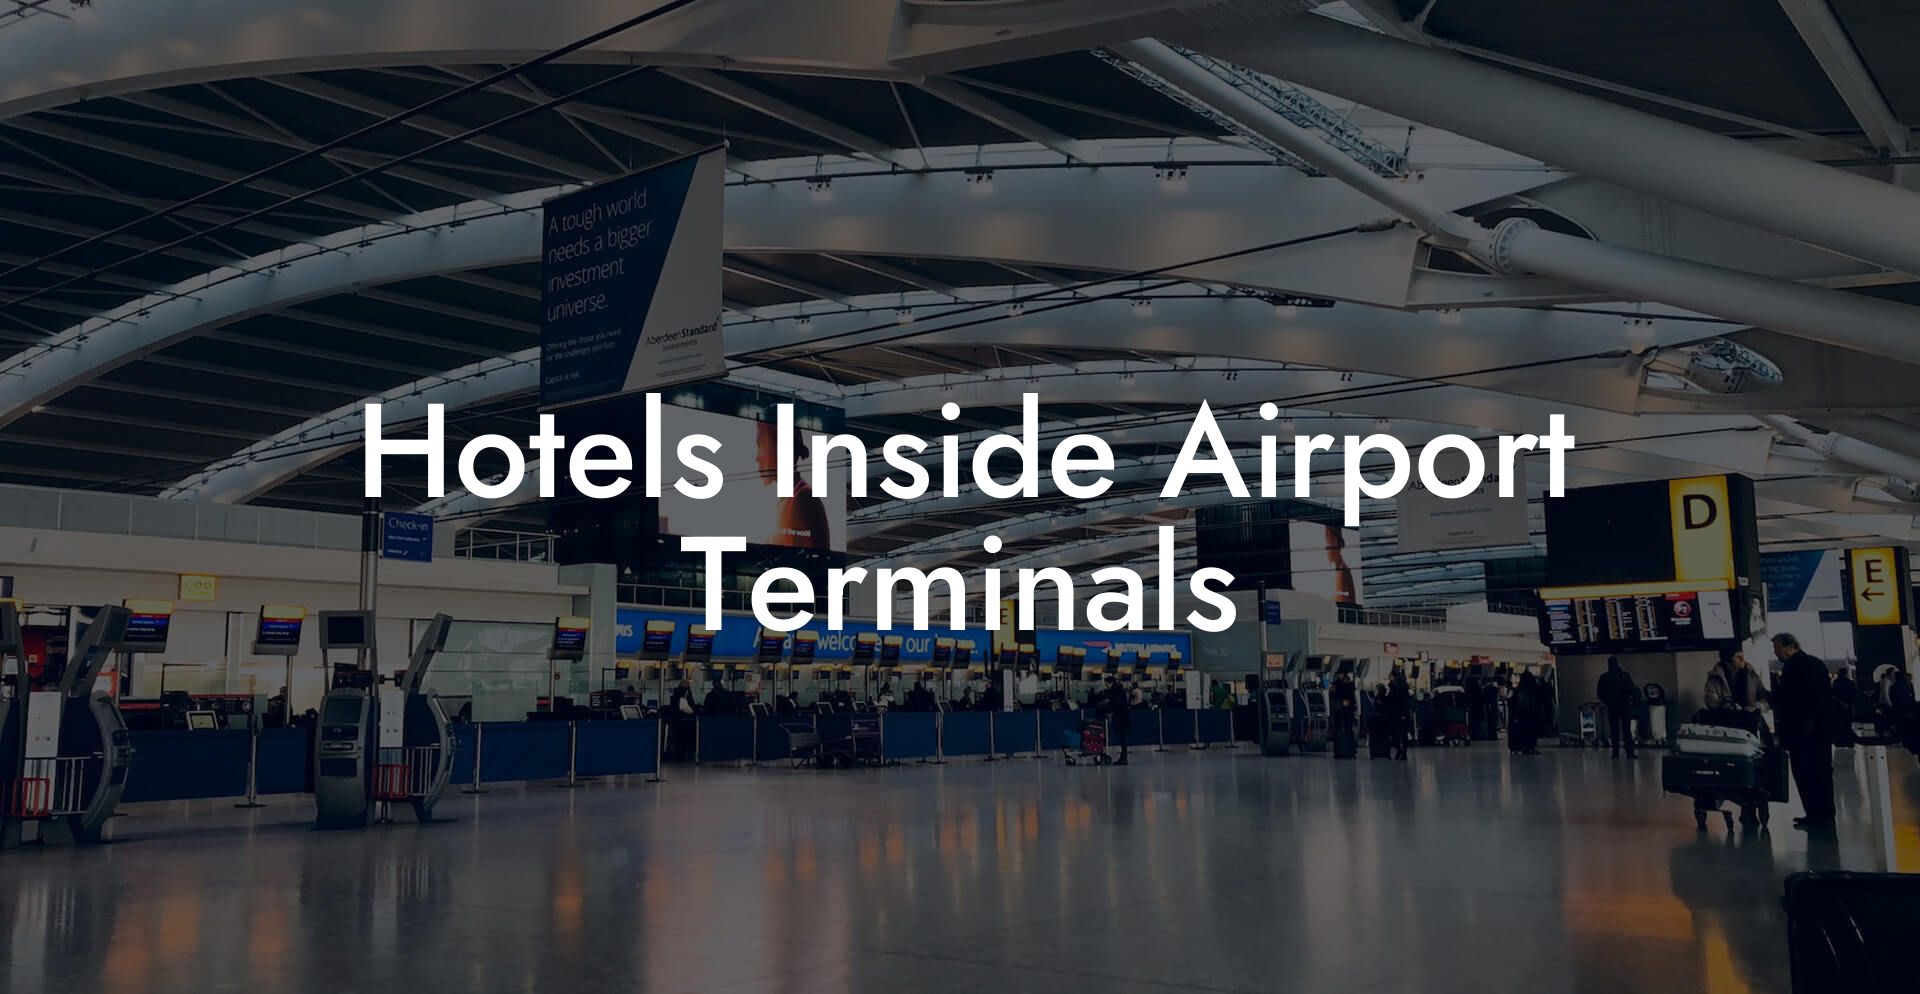 Hotels Inside Airport Terminals